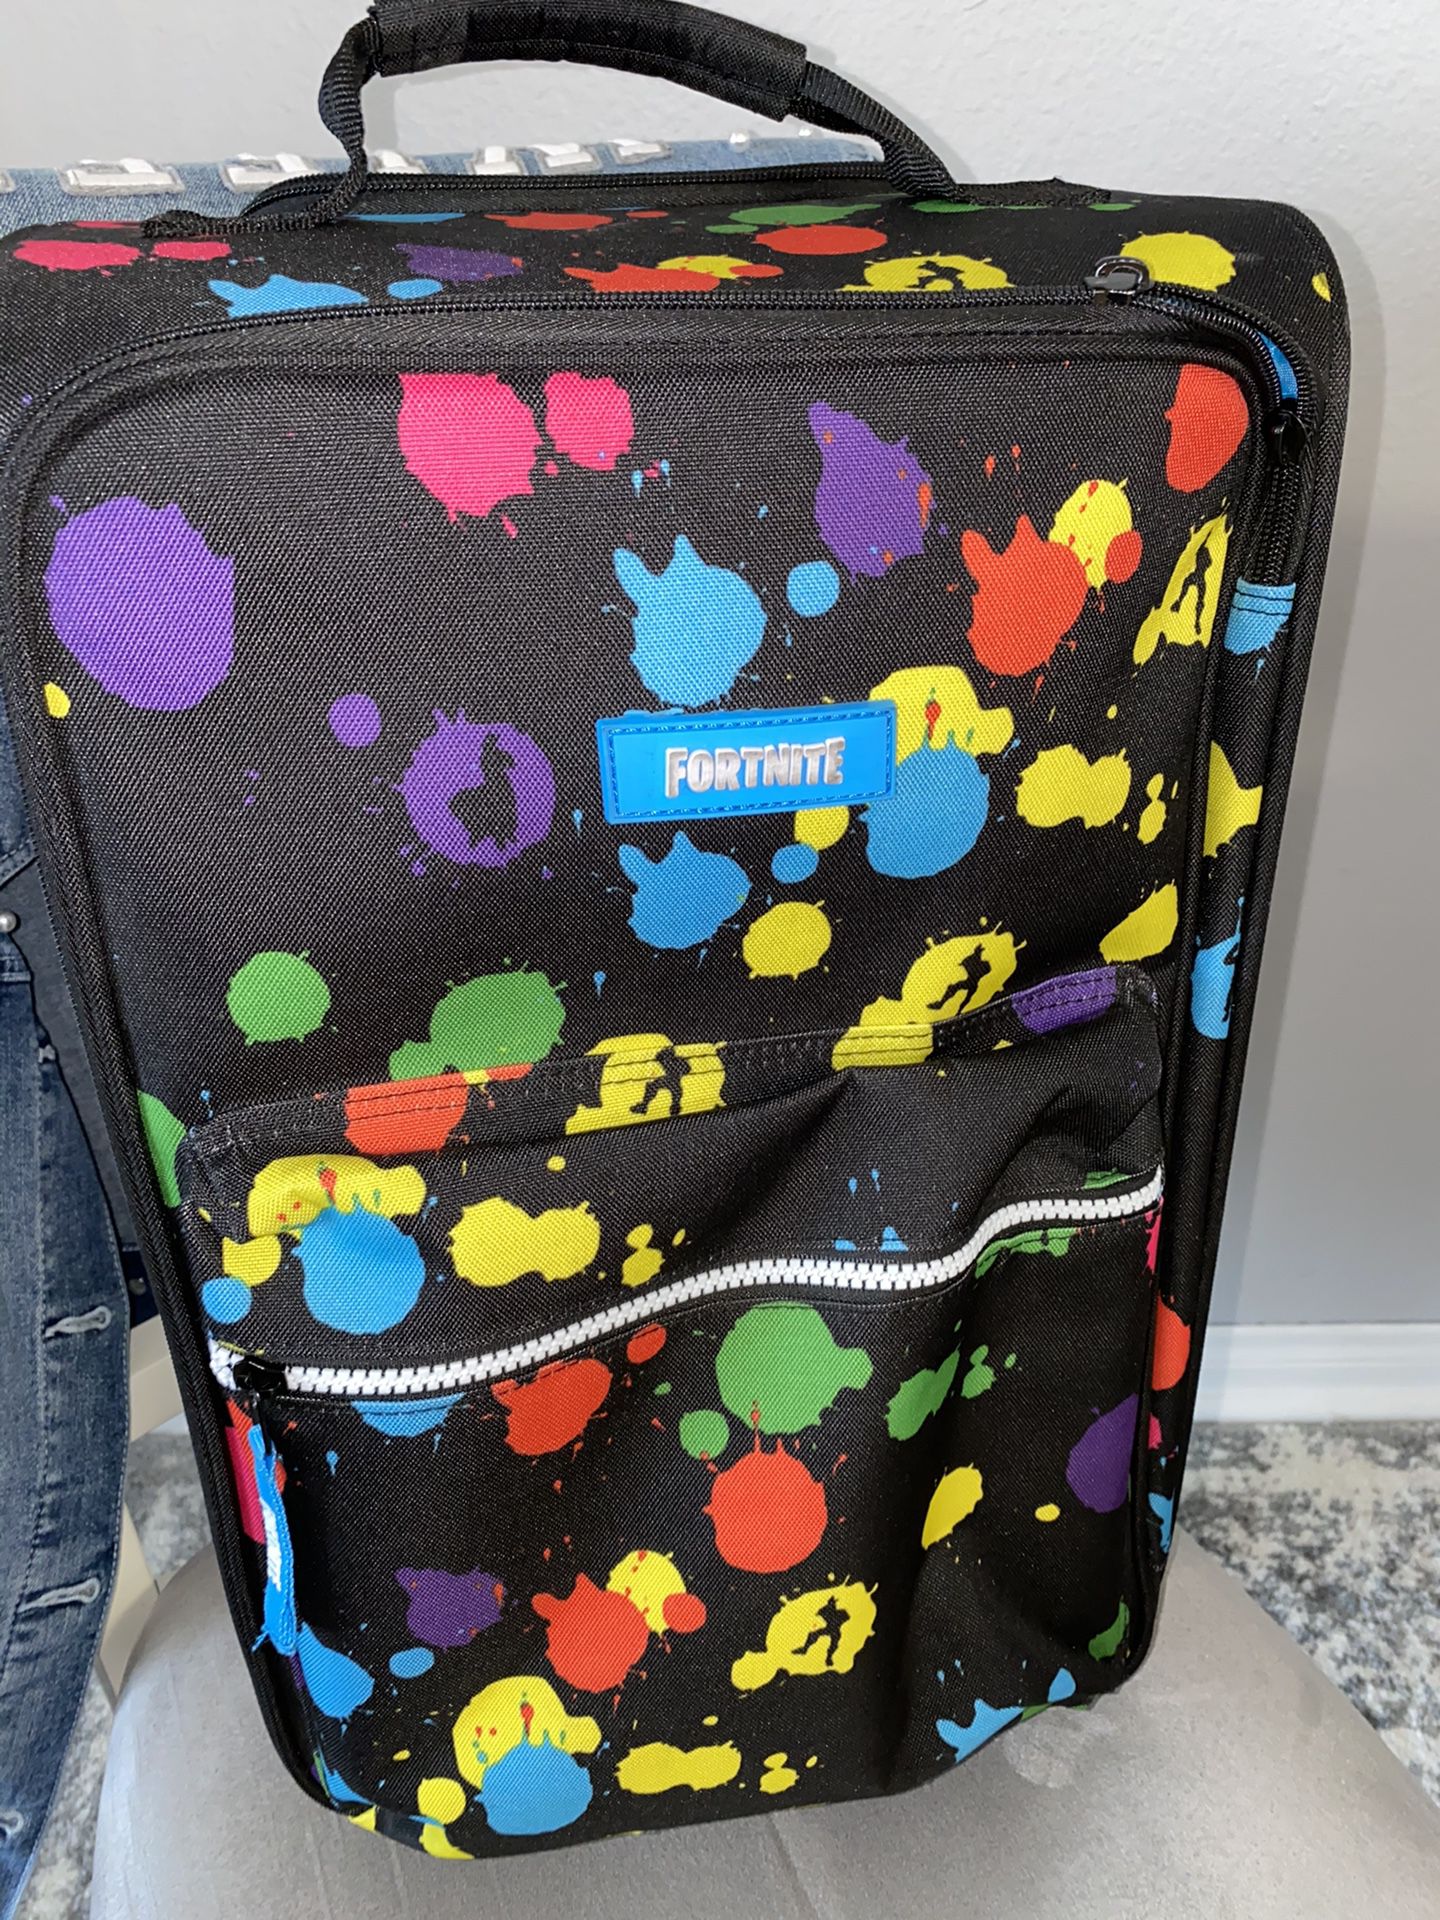 Fortnite Carry-on suitcase